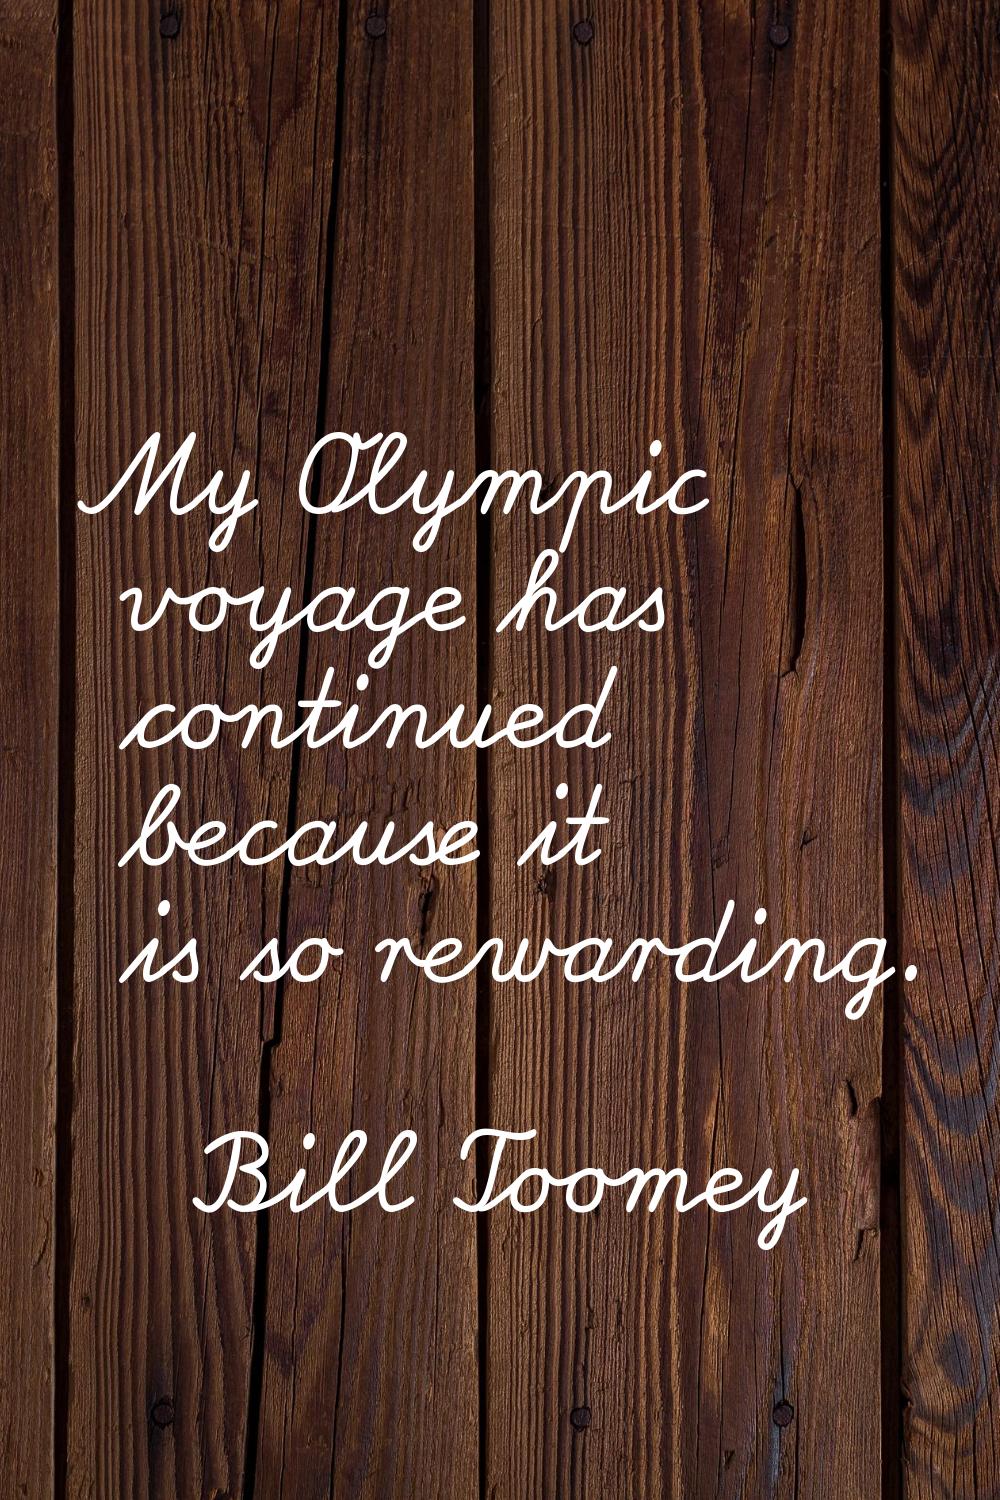 My Olympic voyage has continued because it is so rewarding.